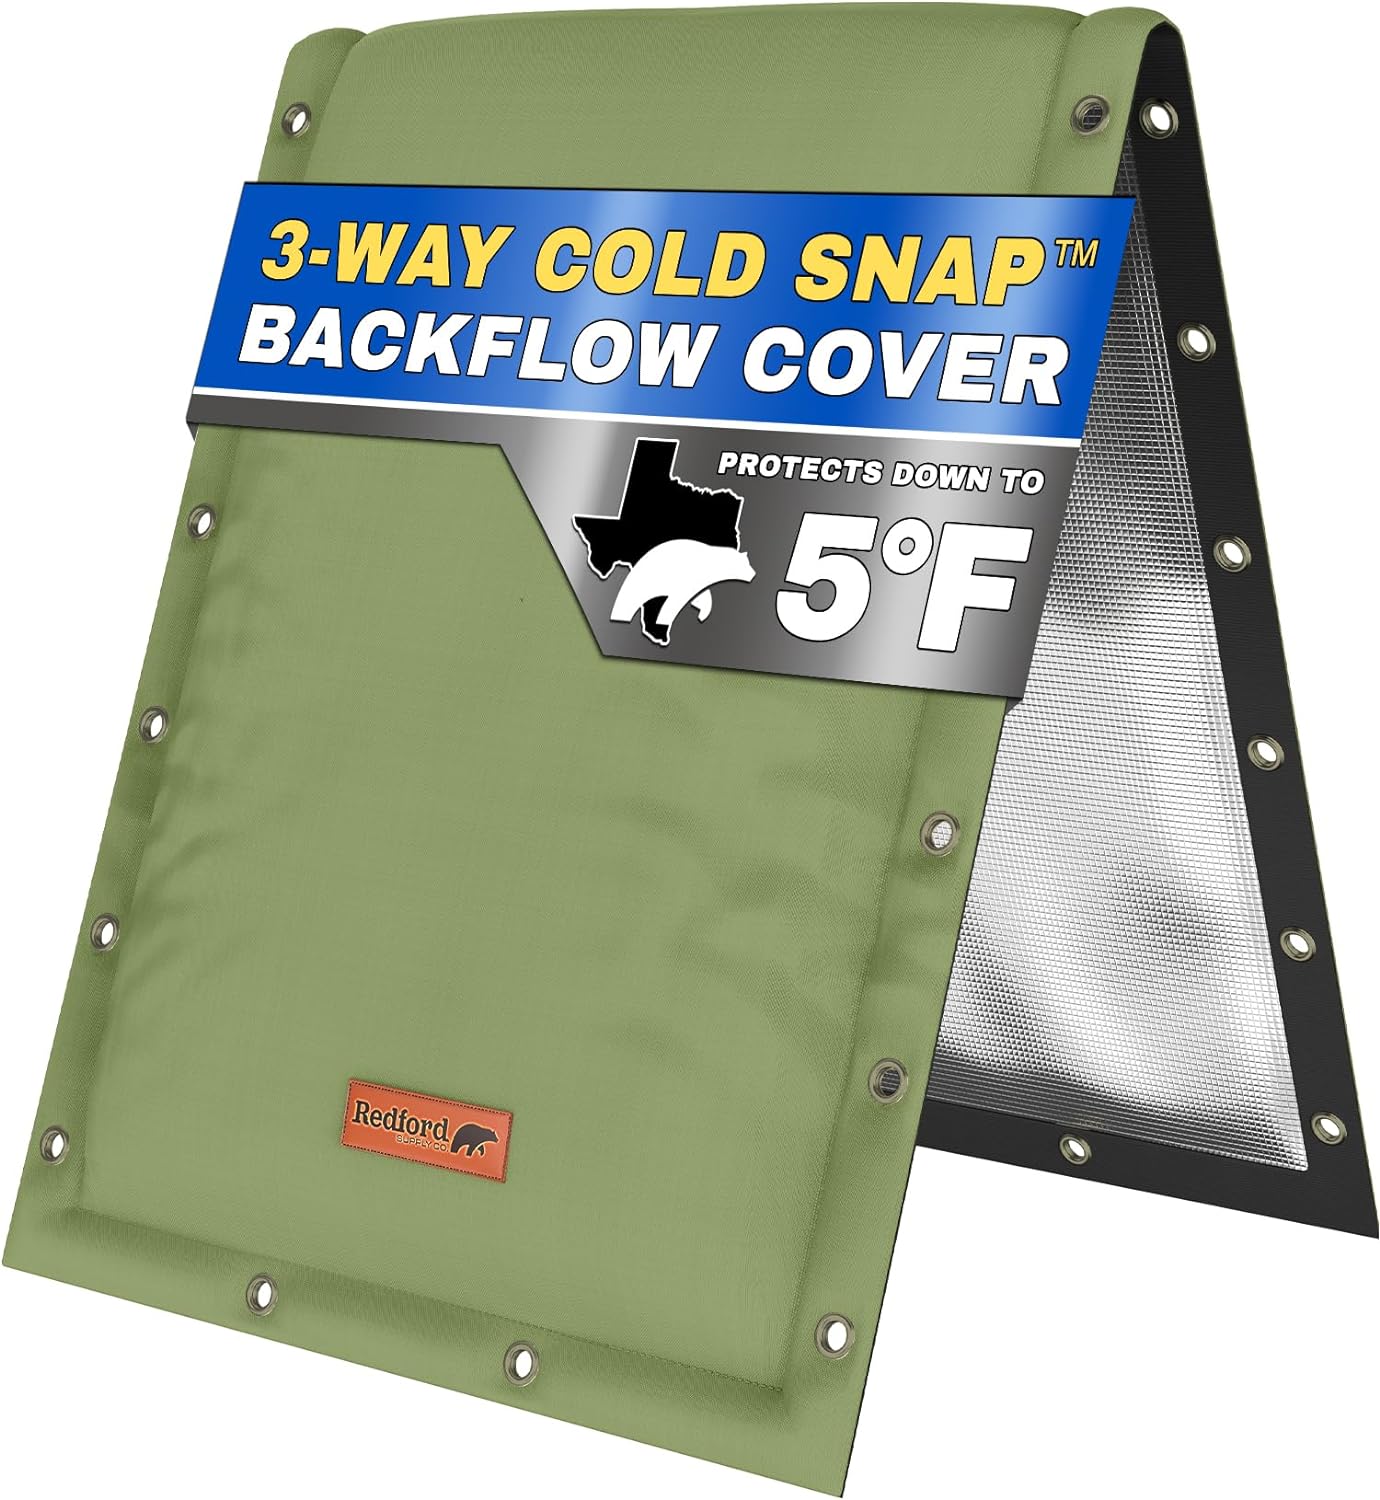 Customizable Cold Snap Double Wall™ Backflow Cover Easily Wraps Over Pipes for Fast Concealment - Prevents Costly Repairs Due to Freezing Weather (Green)